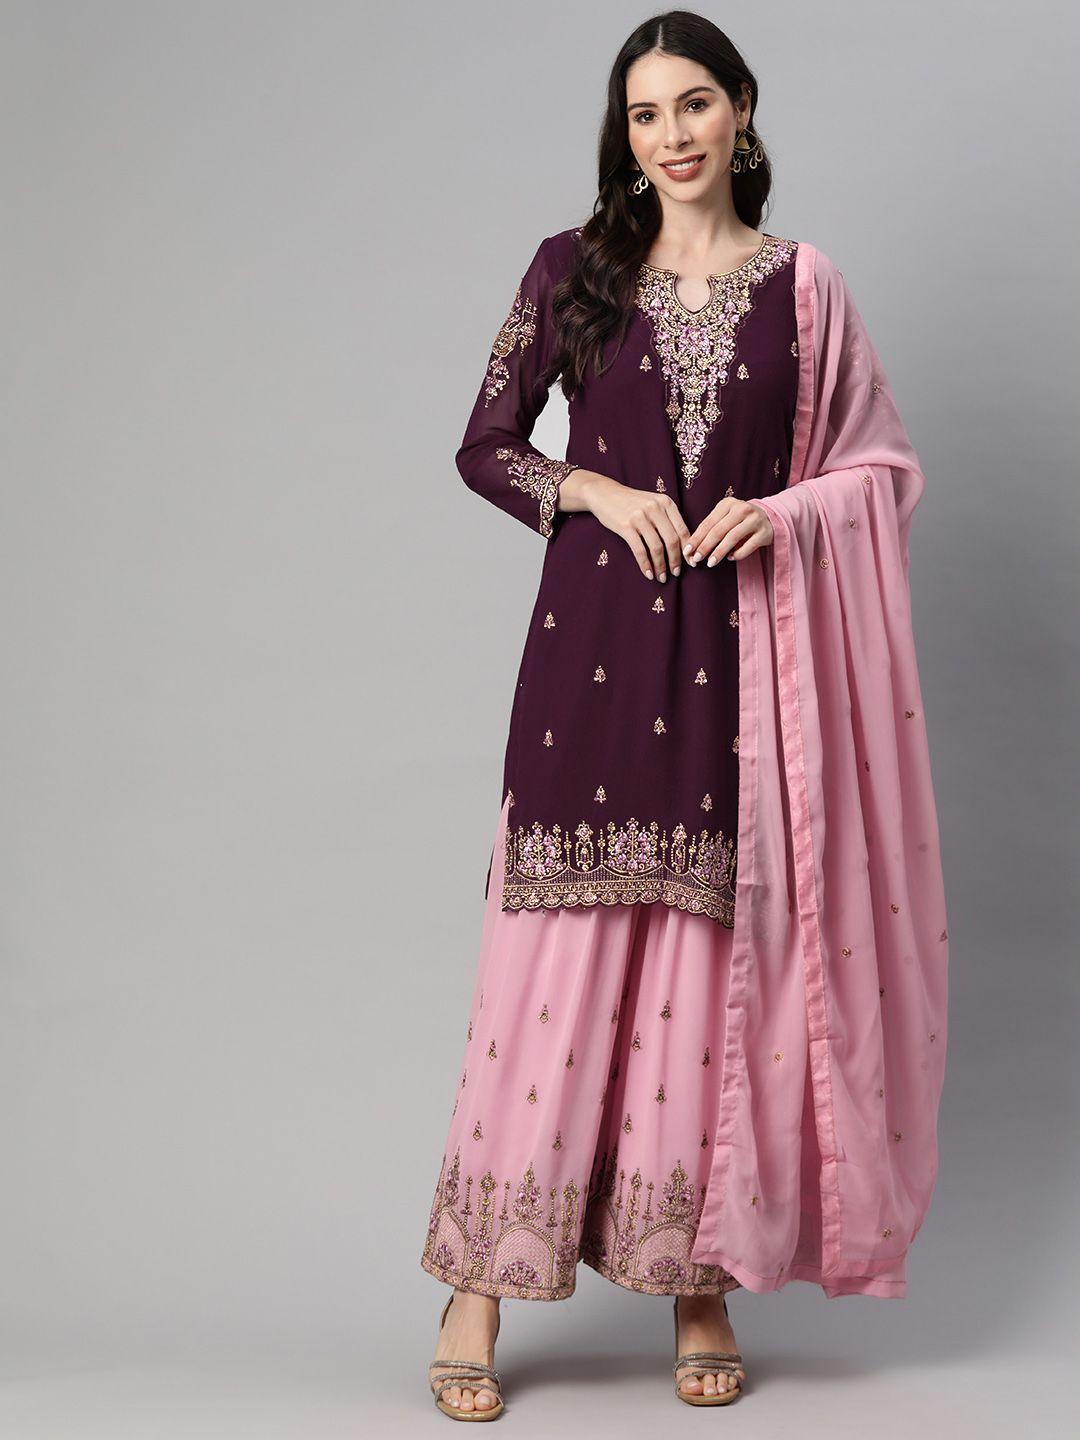 divine international trading co embroidered semi-stitched dress material